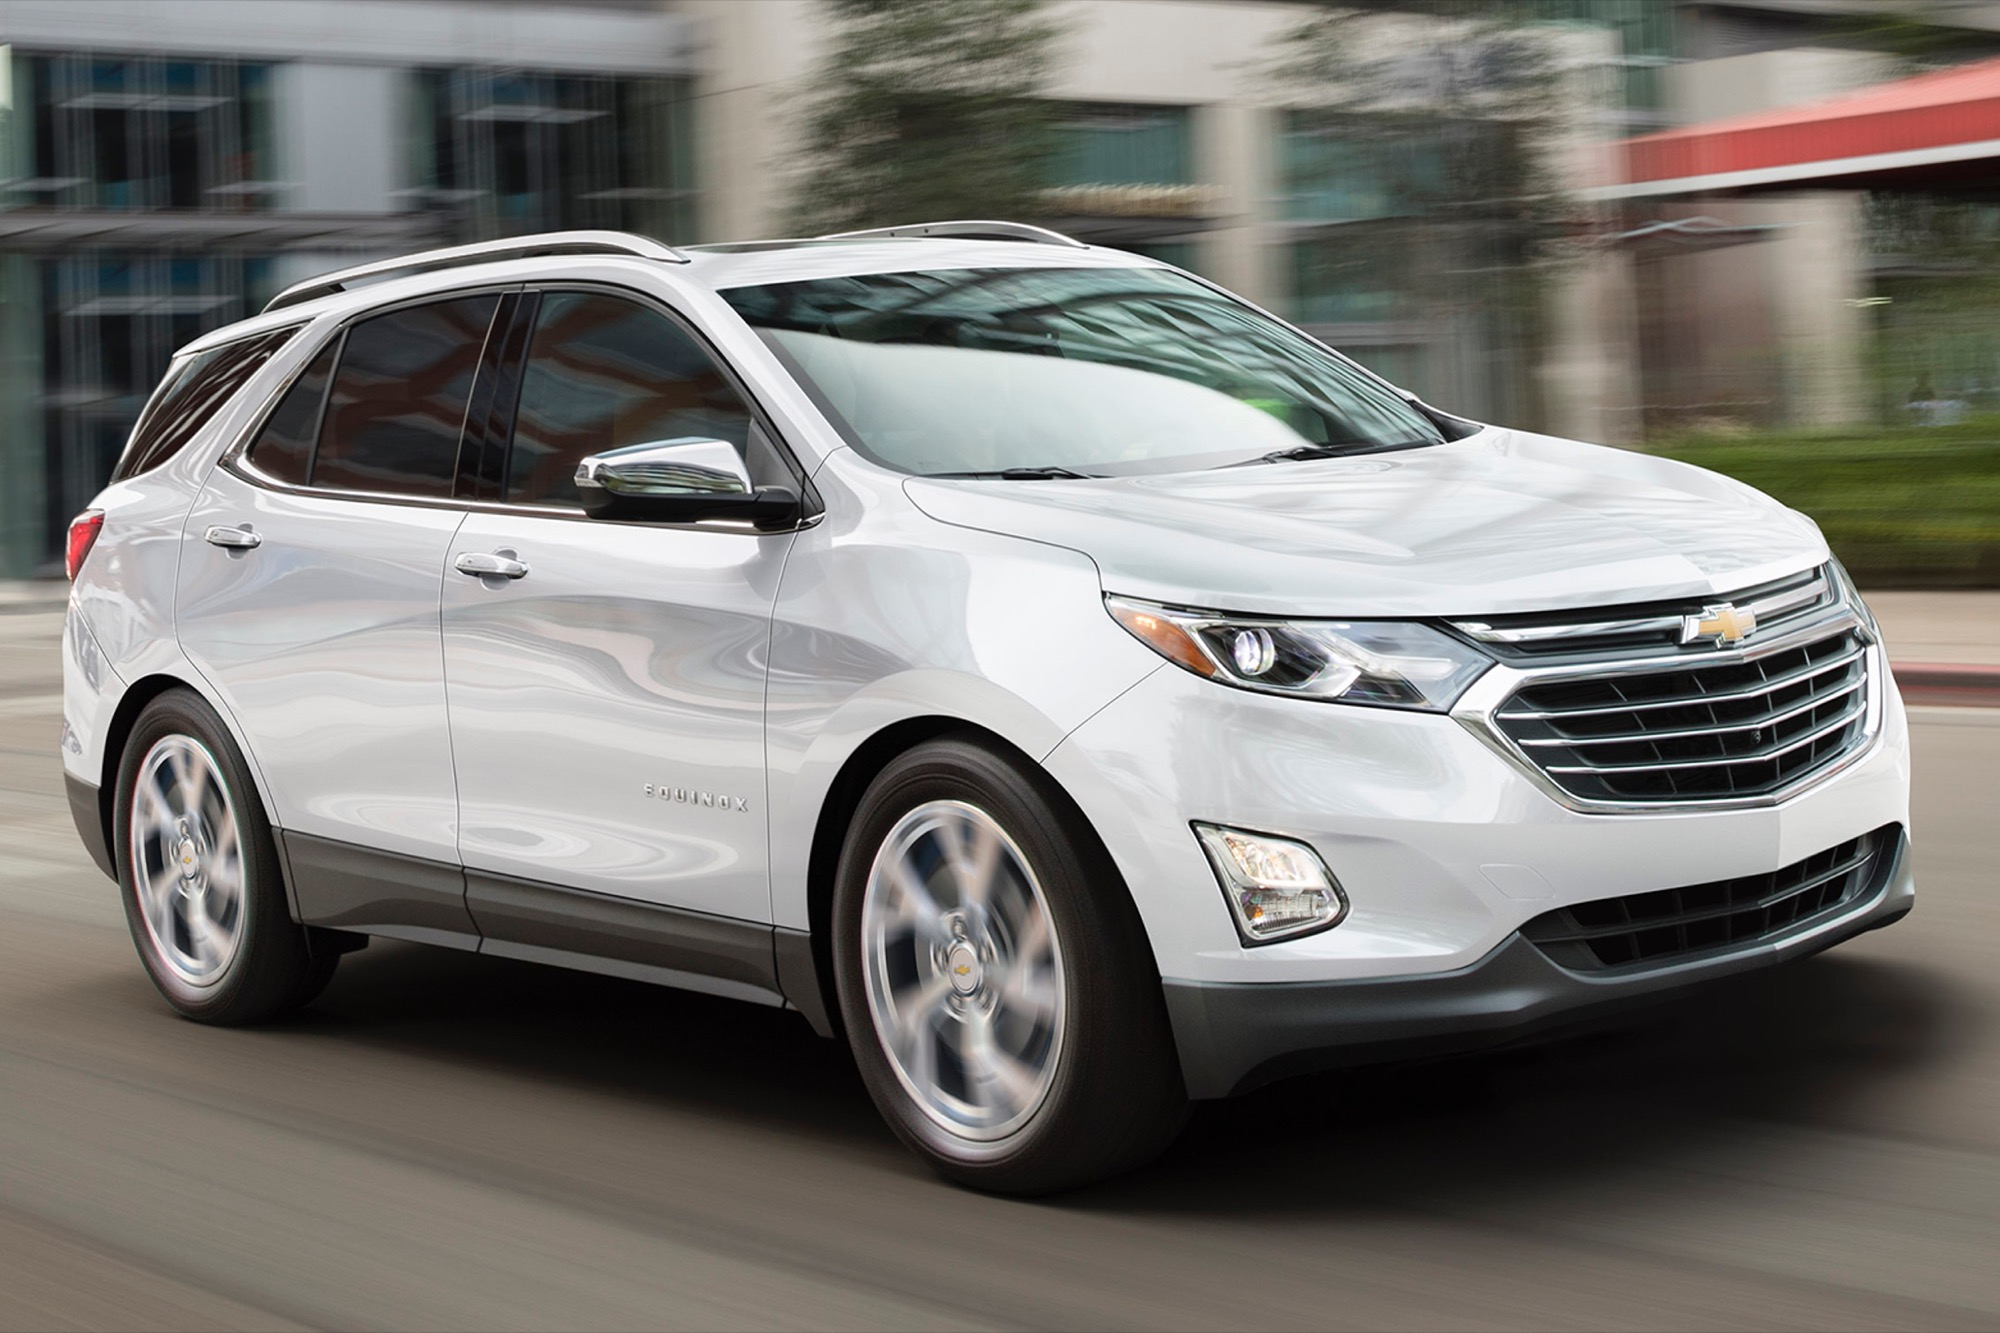 2018 Chevy Equinox Info Pictures Specs Wiki Gm Authority